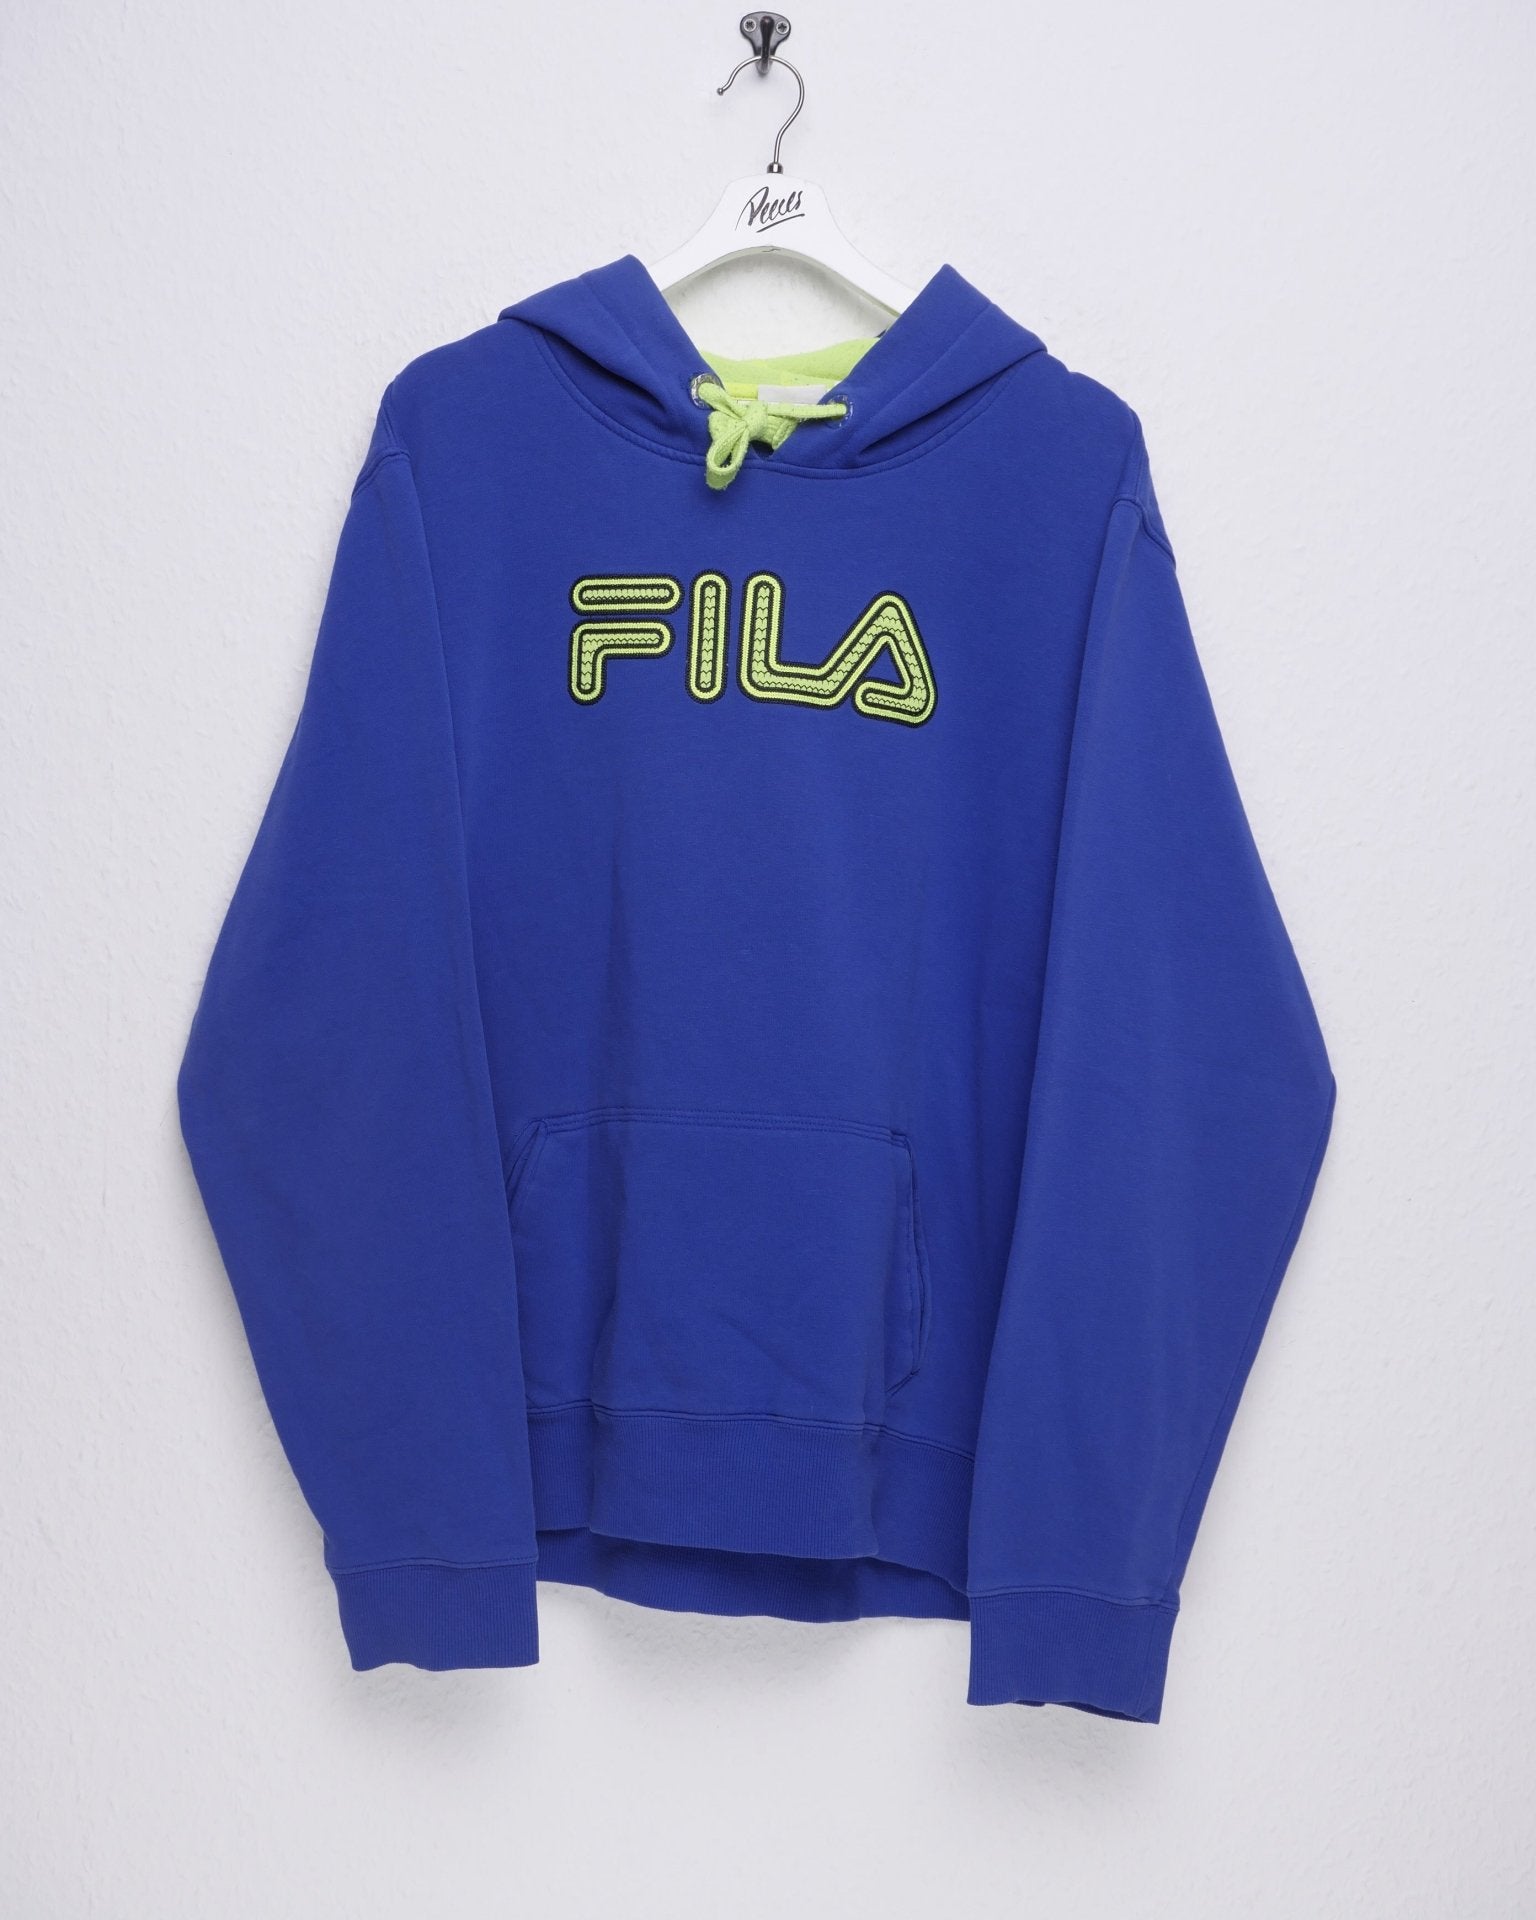 Fila embroidered Spellout Vintage Hoodie - Peeces